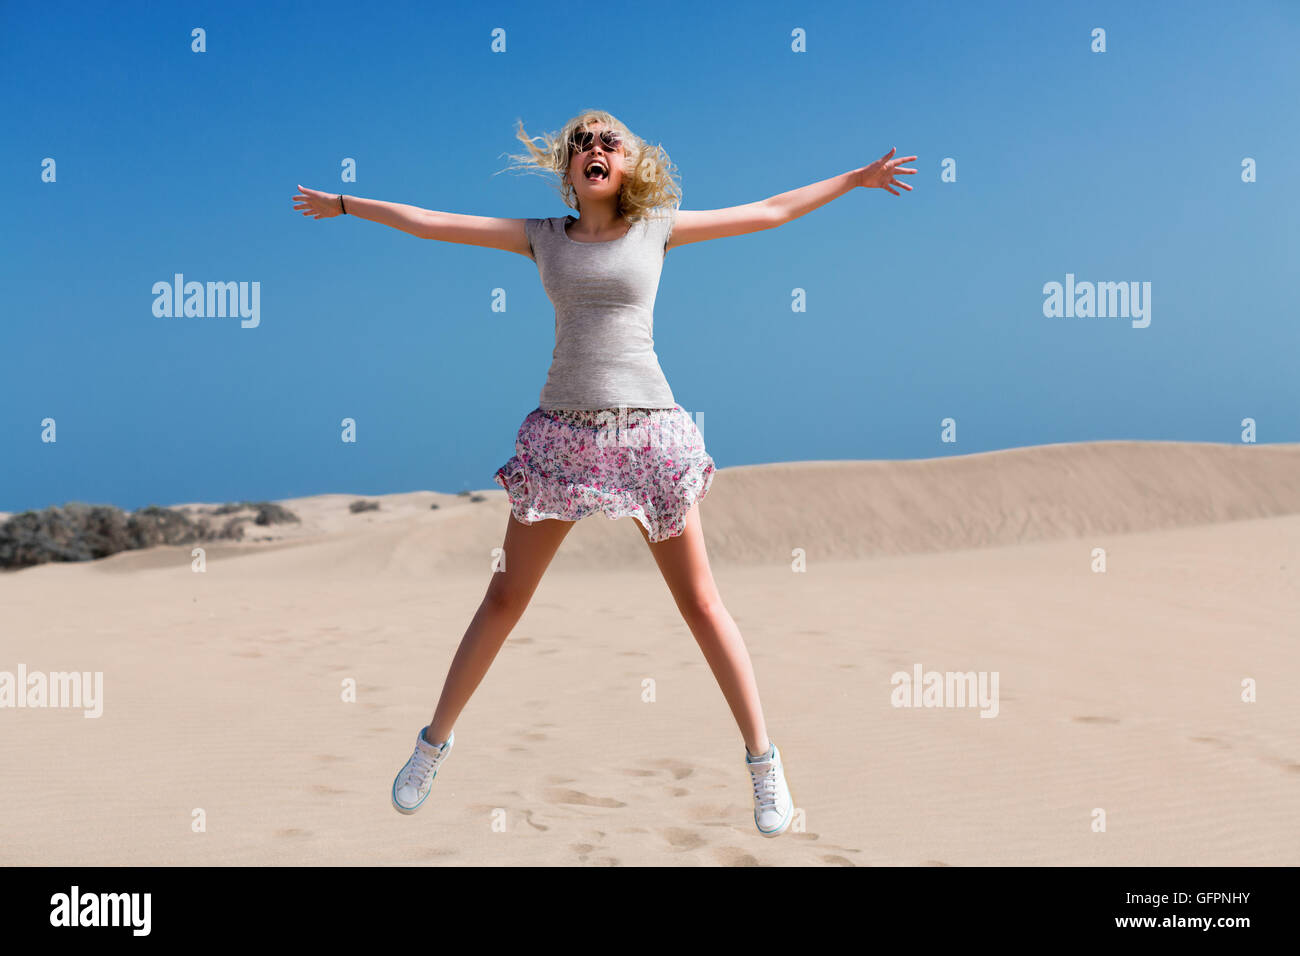 A young girl wearing a skirt jumping on the sand desert Stock Photo